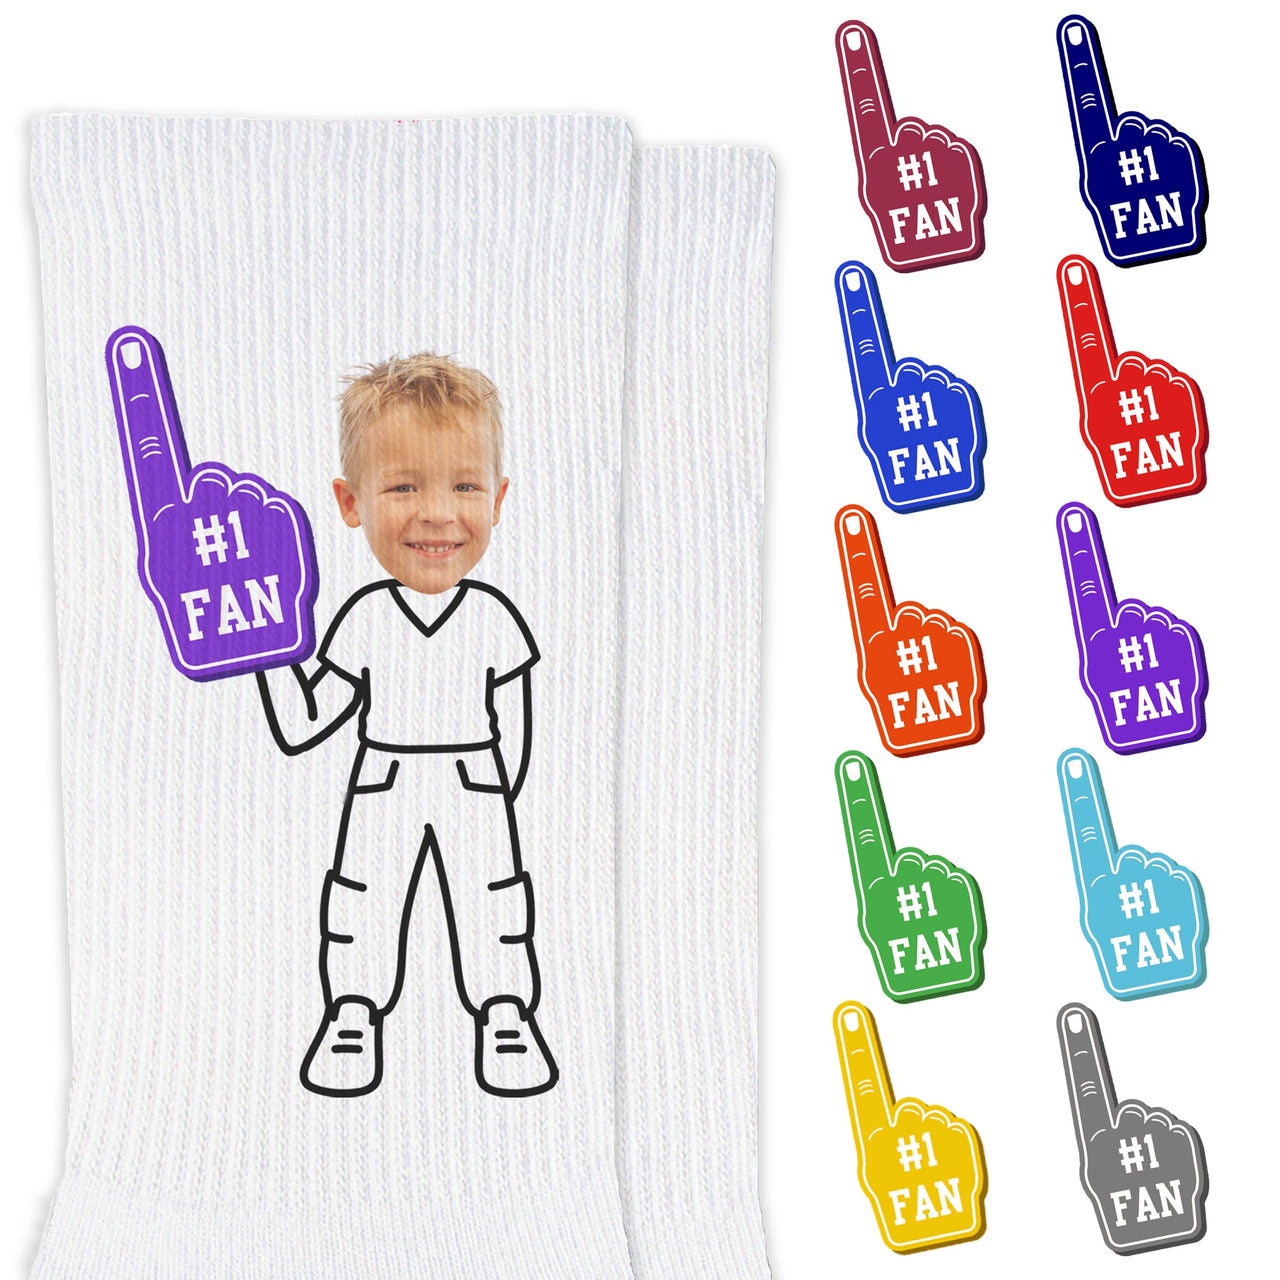 Custom printed #1 fan design with your photo face cropped onto body character style you select digitally printed on the sides of white cotton no show socks.